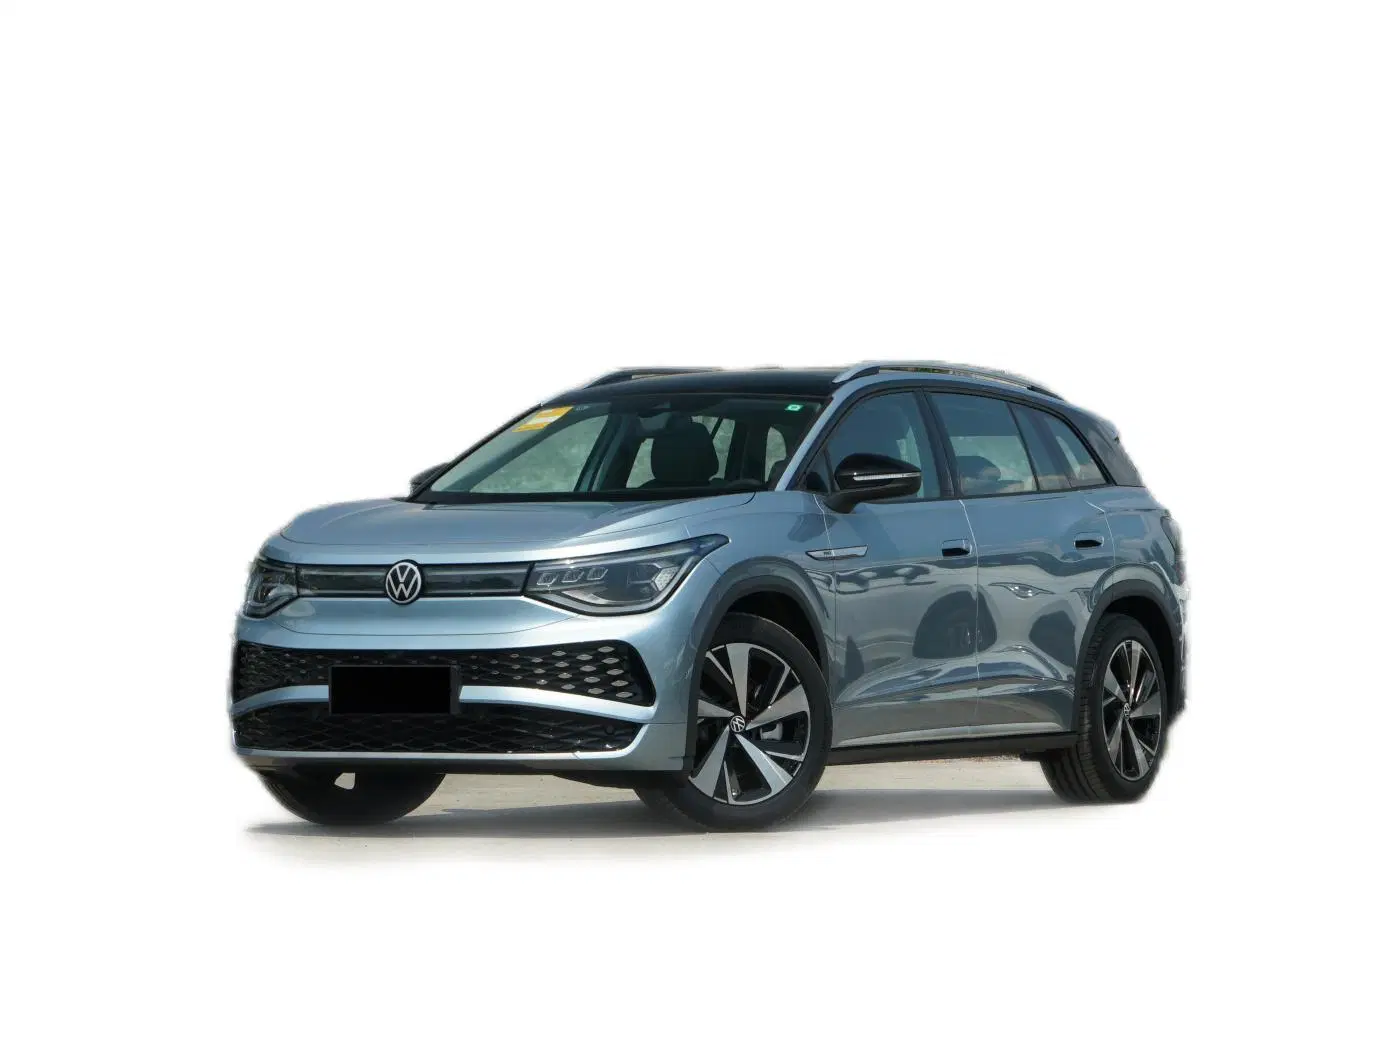 ID. 6 Crozz/ID6. X 2023 Version in Stock Used SUV New Energy Vehicle Long Range Passenger Pure EV 7 Seats Fast Charge Battery Used Volkswagen Electric Car